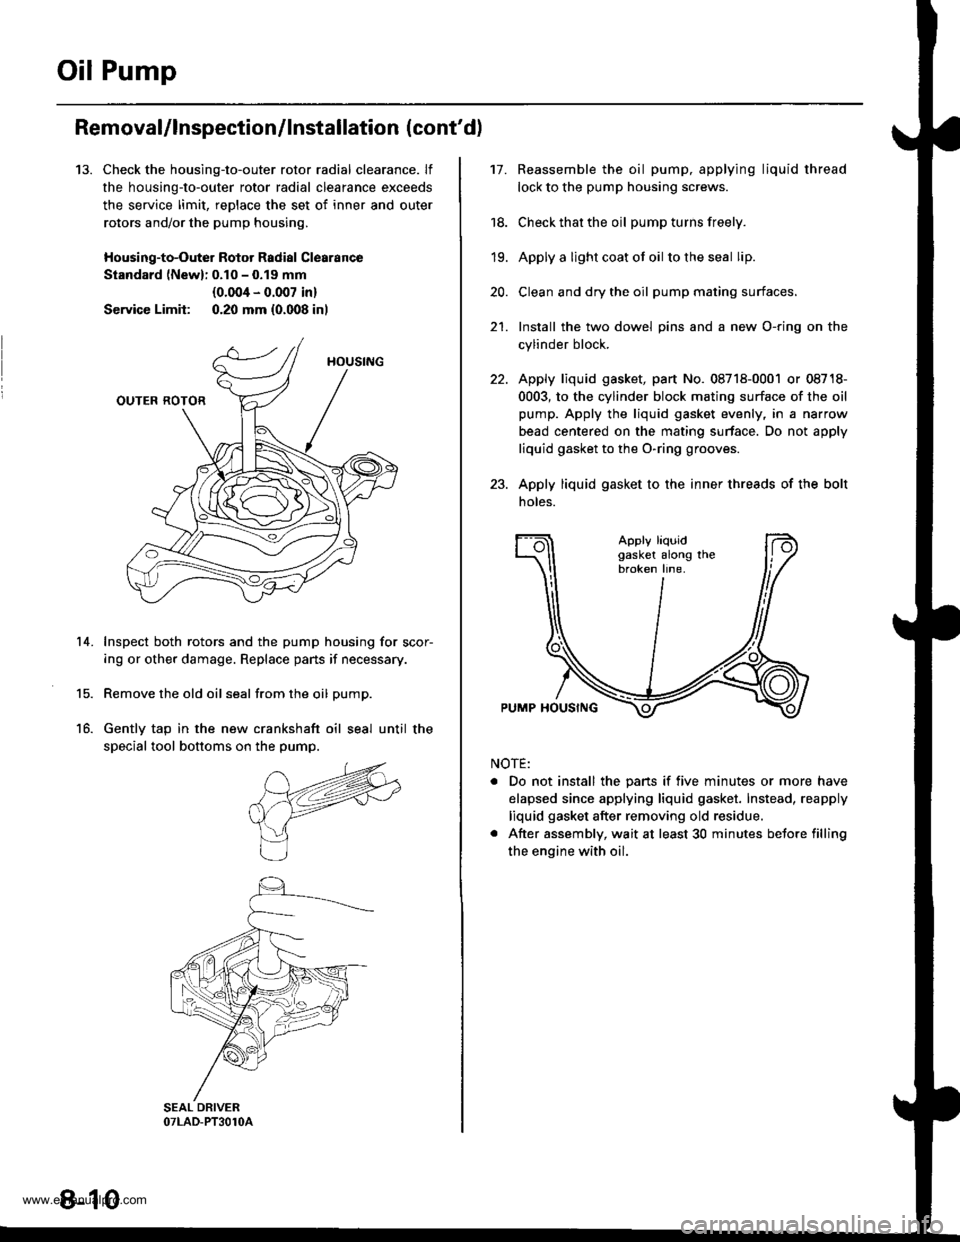 HONDA CR-V 2000 RD1-RD3 / 1.G Owners Manual 
Oil Pump
13.
Removal/lnspection/lnstallation (contd)
Check the housing-to-outer rotor radial clearance. lf
the housing-to-outer rotor radial clearance exceeds
the service limit, reDlace the set of i